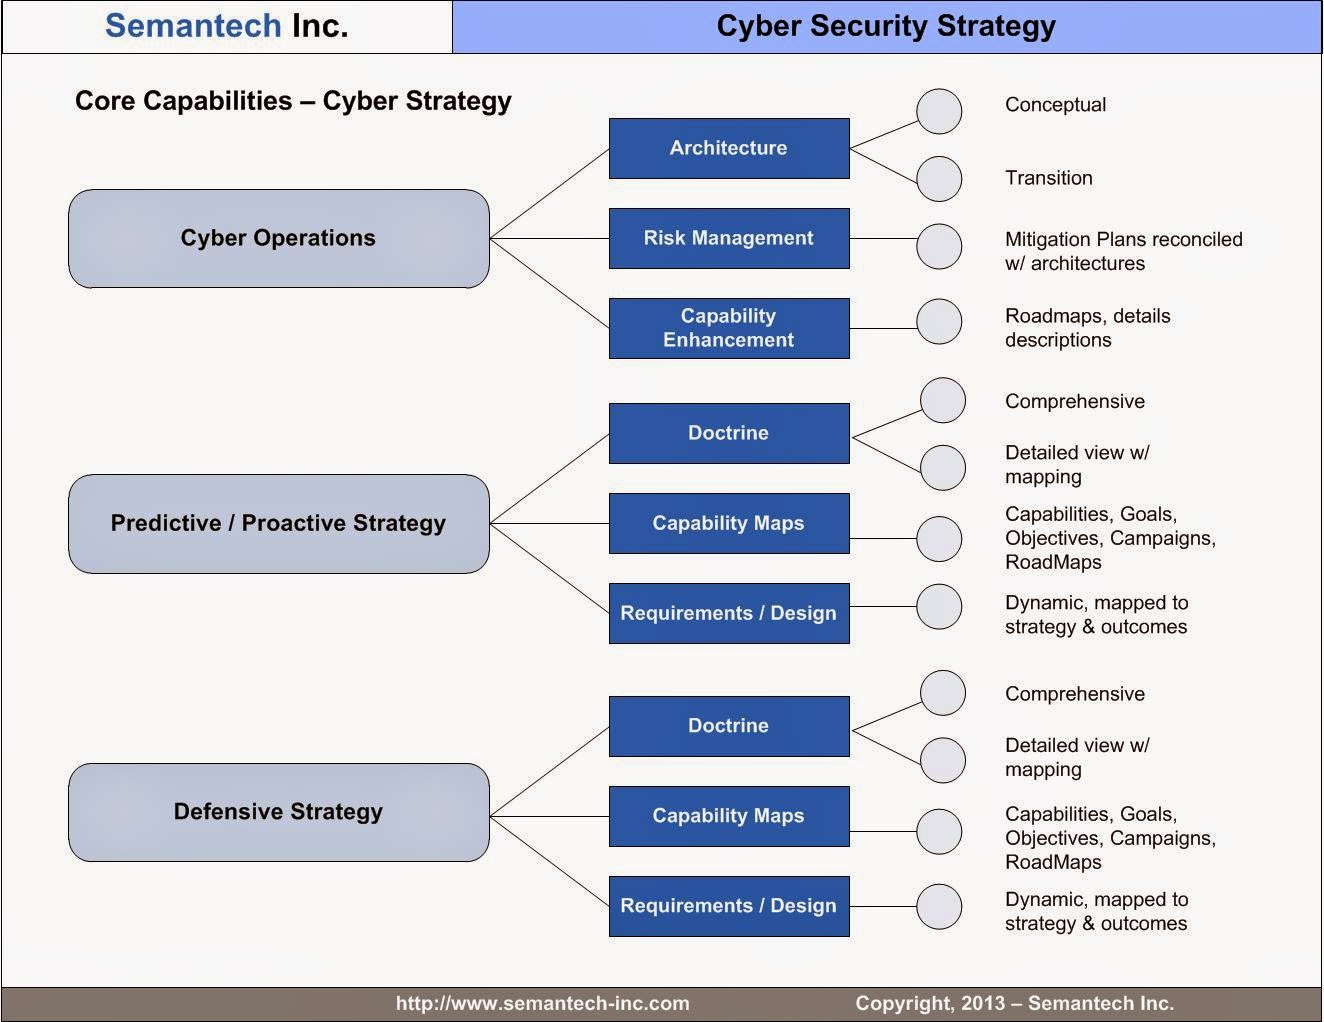 How to Build A Solid Cyber Security Strategy in 5 Steps - Stanfield IT